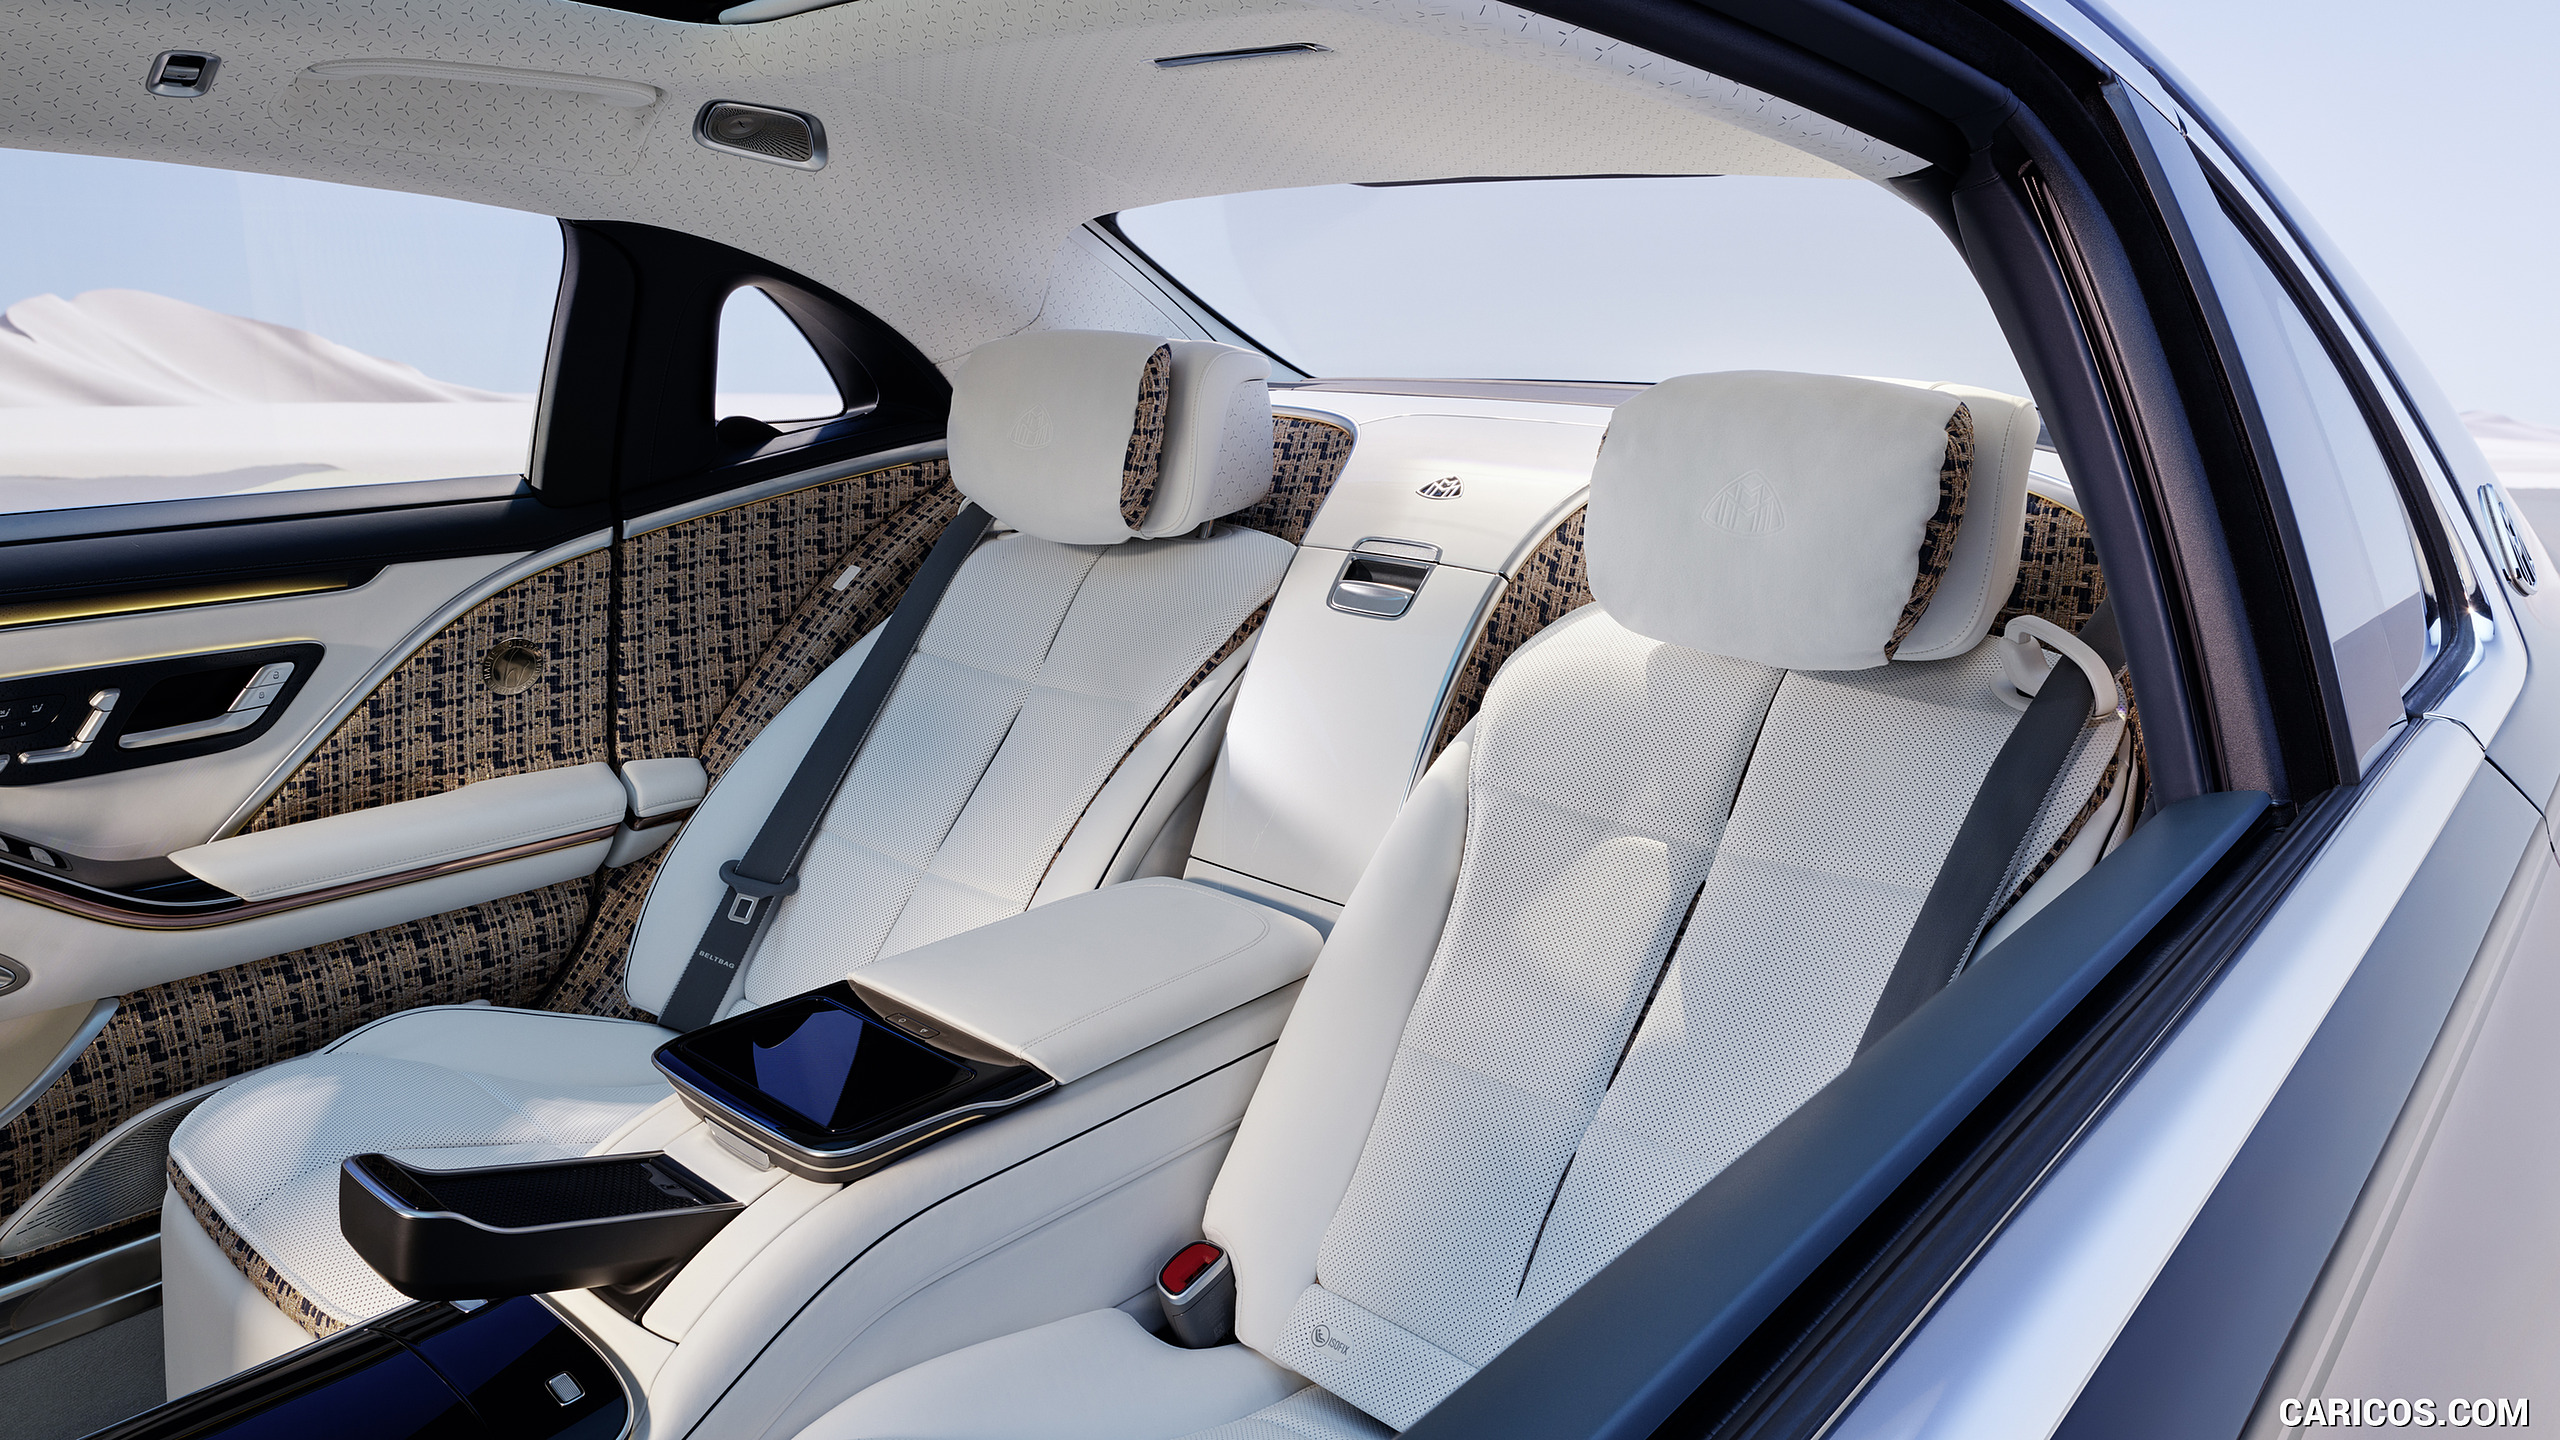 2023 Mercedes-Maybach S-Class Haute Voiture - Interior, Rear Seats, #19 of 29